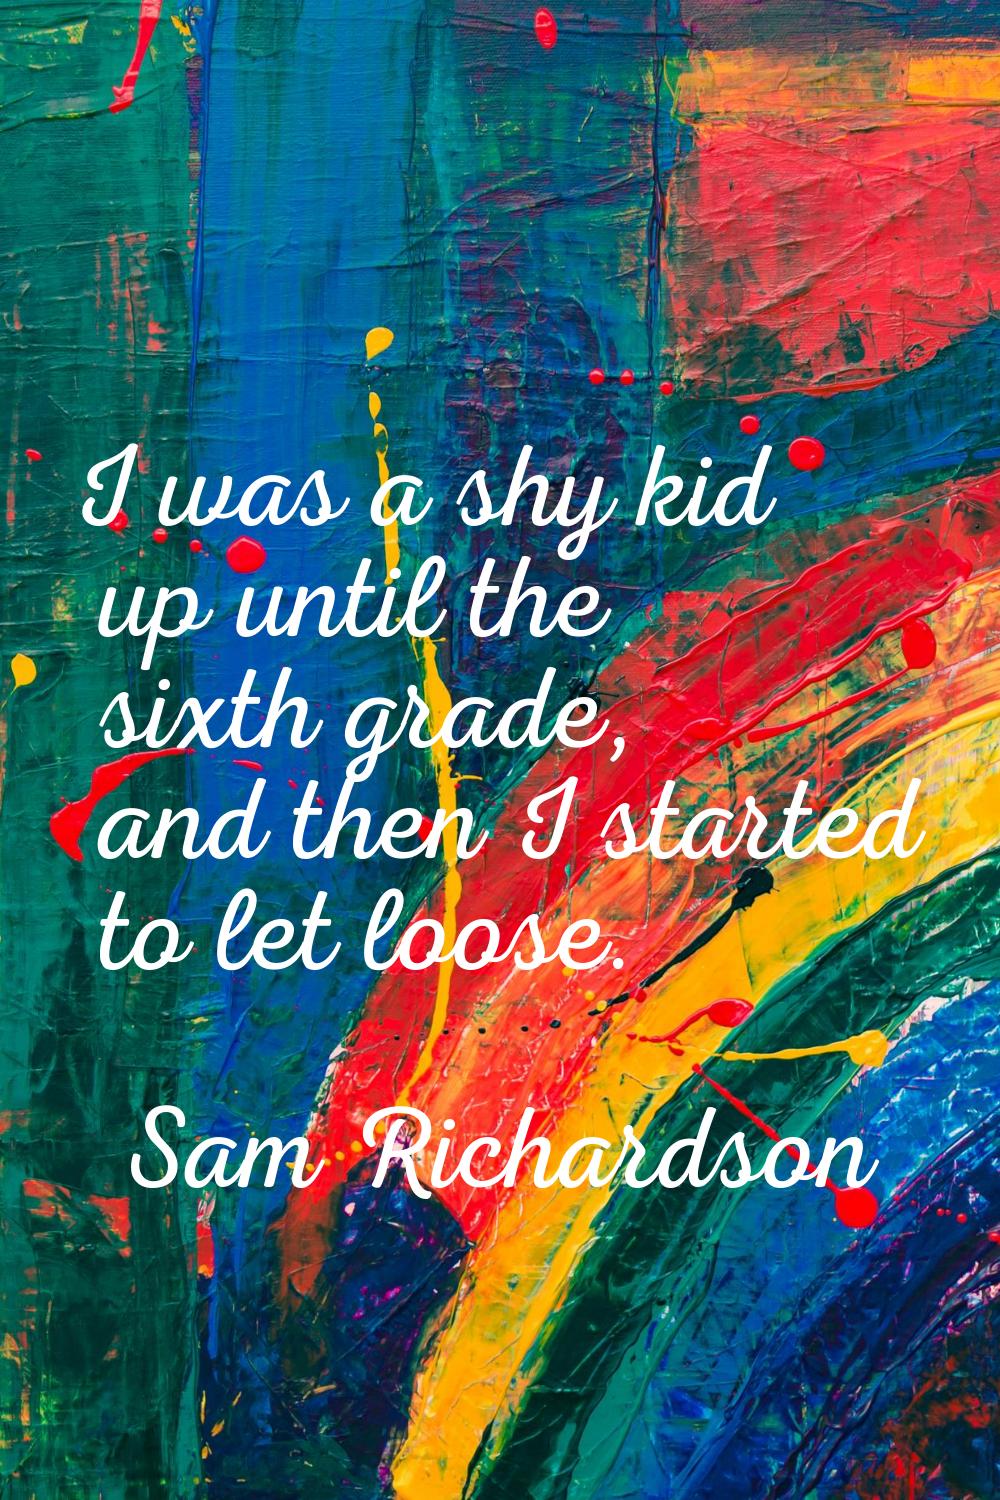 I was a shy kid up until the sixth grade, and then I started to let loose.